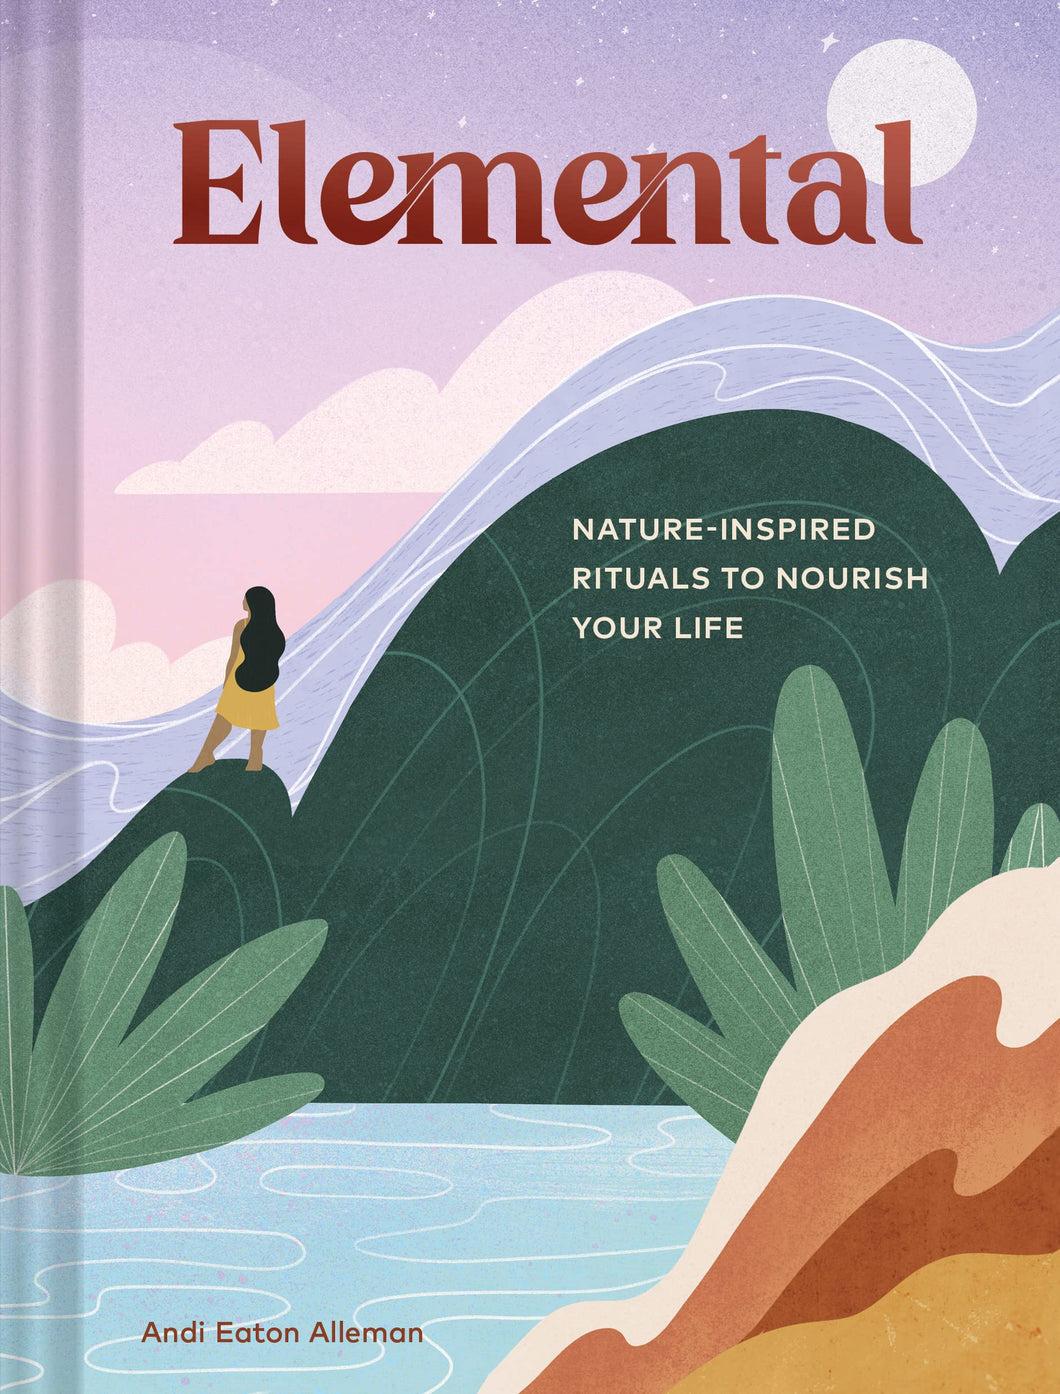 Elemental: Nature-Inspired Rituals To Nourish Your Life [Andi Eaton Alleman]